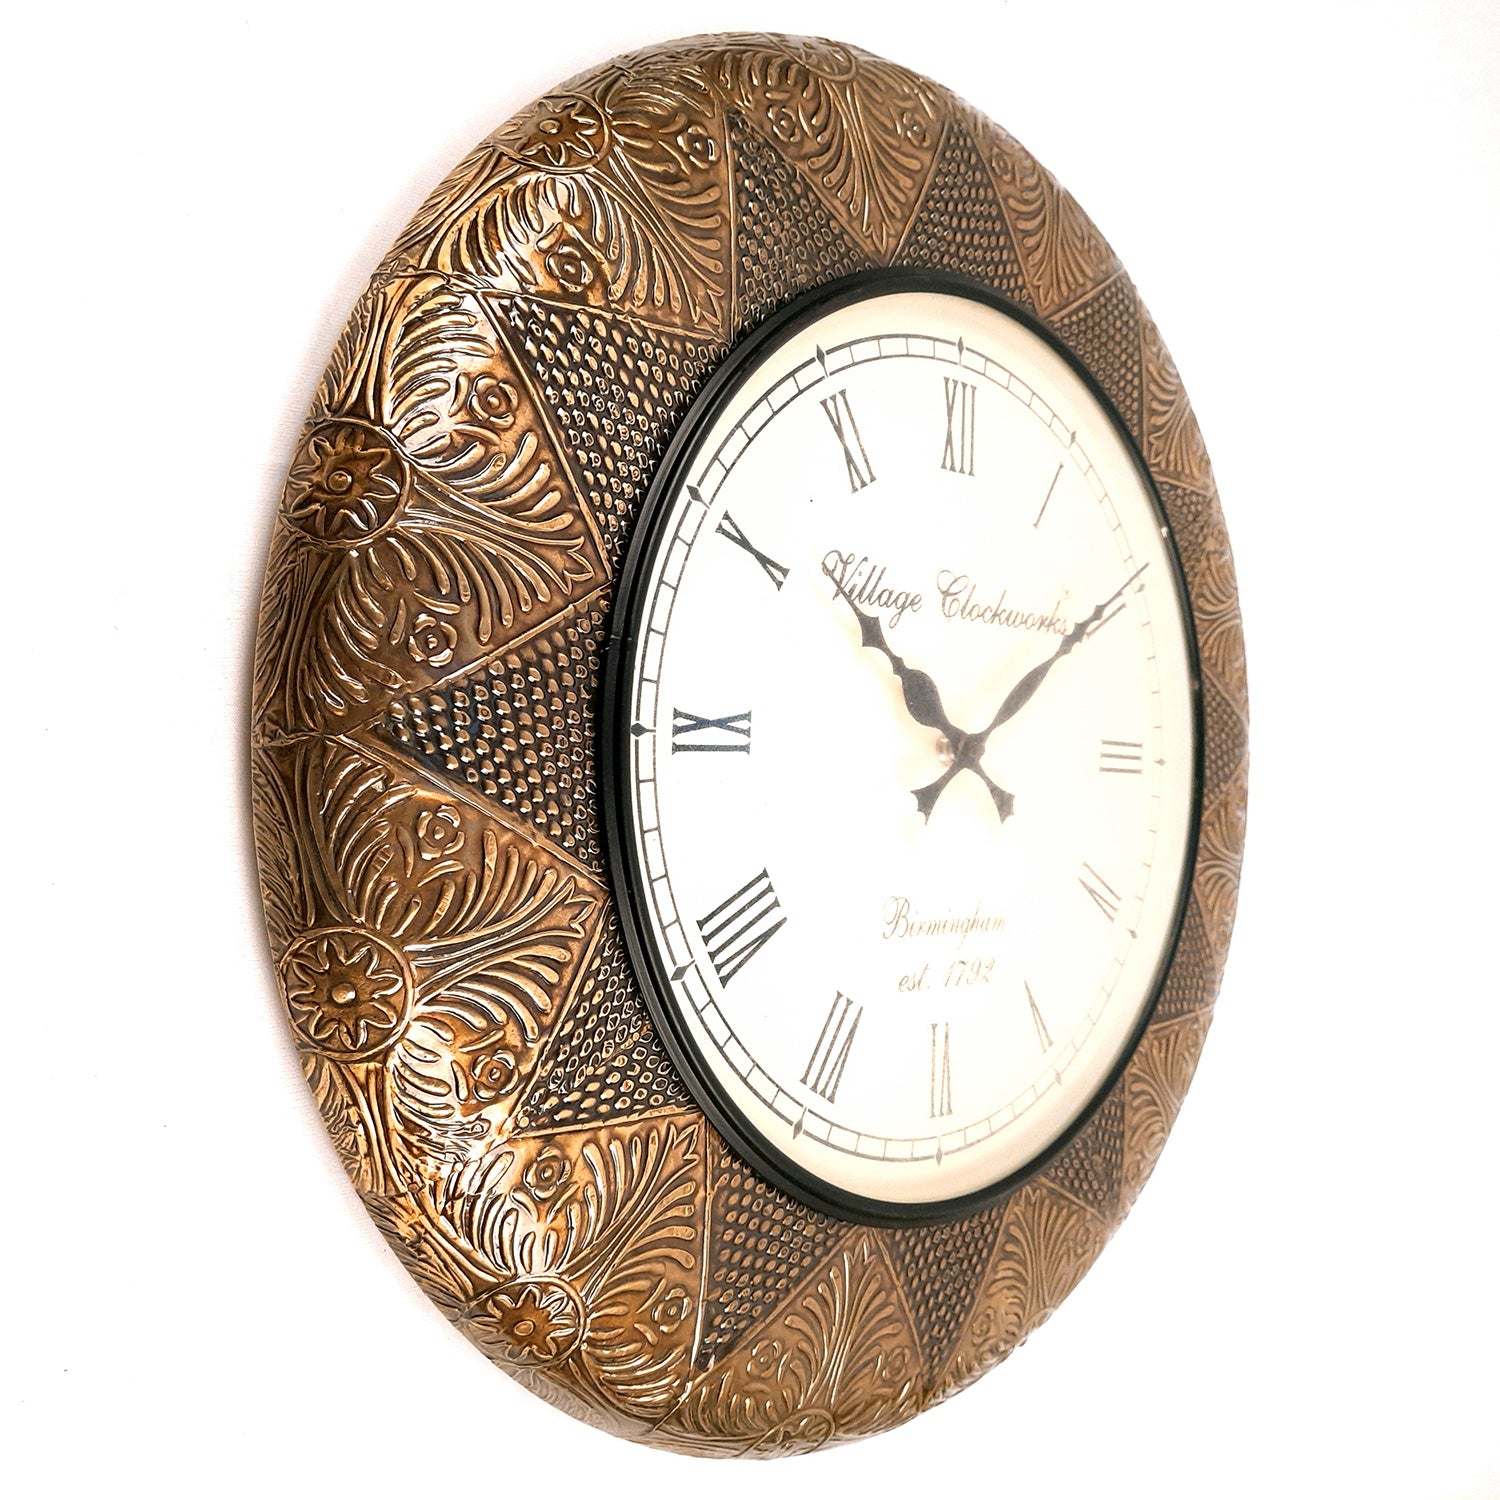 Wall Clock Vintage for Living Room | Wall Mount Clock With Antique Brass Work - For Home, Office, Bedroom, Hall Decor & Gifts | Wedding & Housewarming Gift - 18 Inch